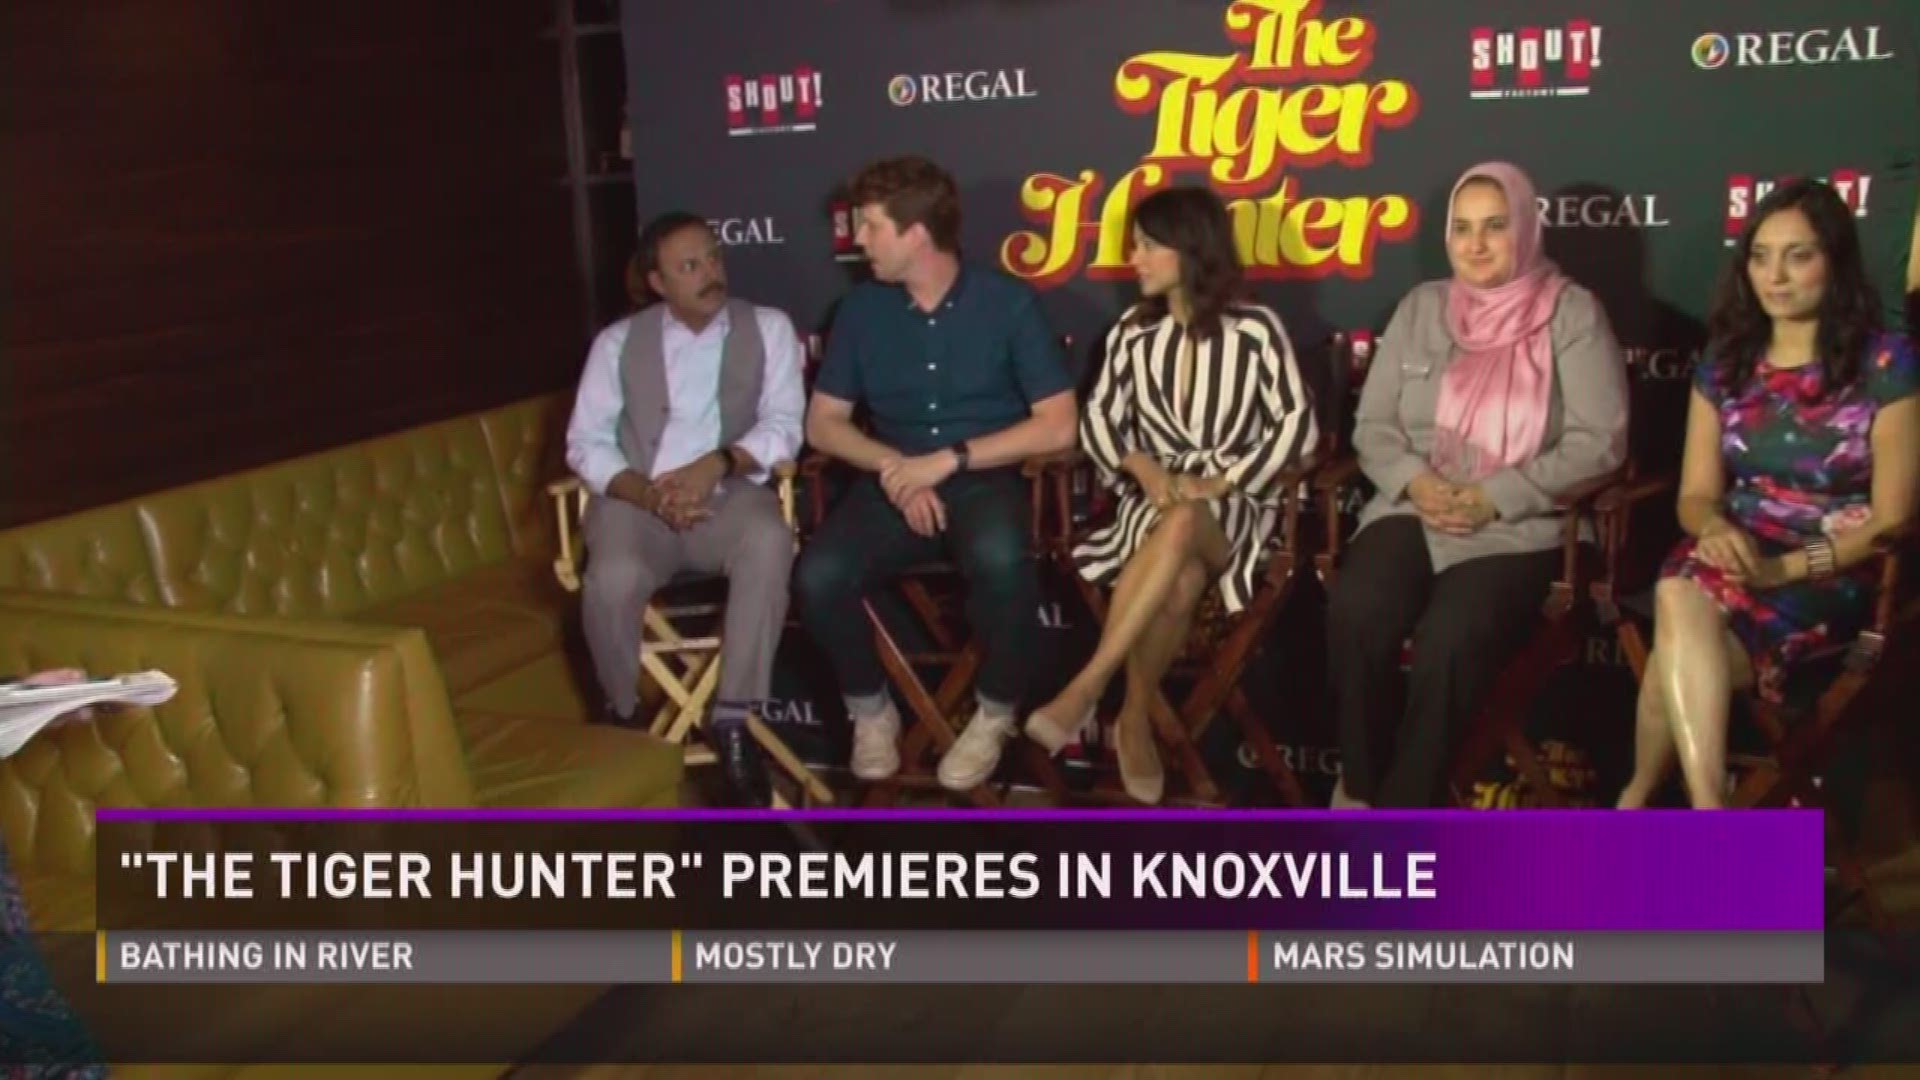 Sept. 18, 2017: Hollywood star John Heder came to Knoxville for the premiere of his most recent movie.